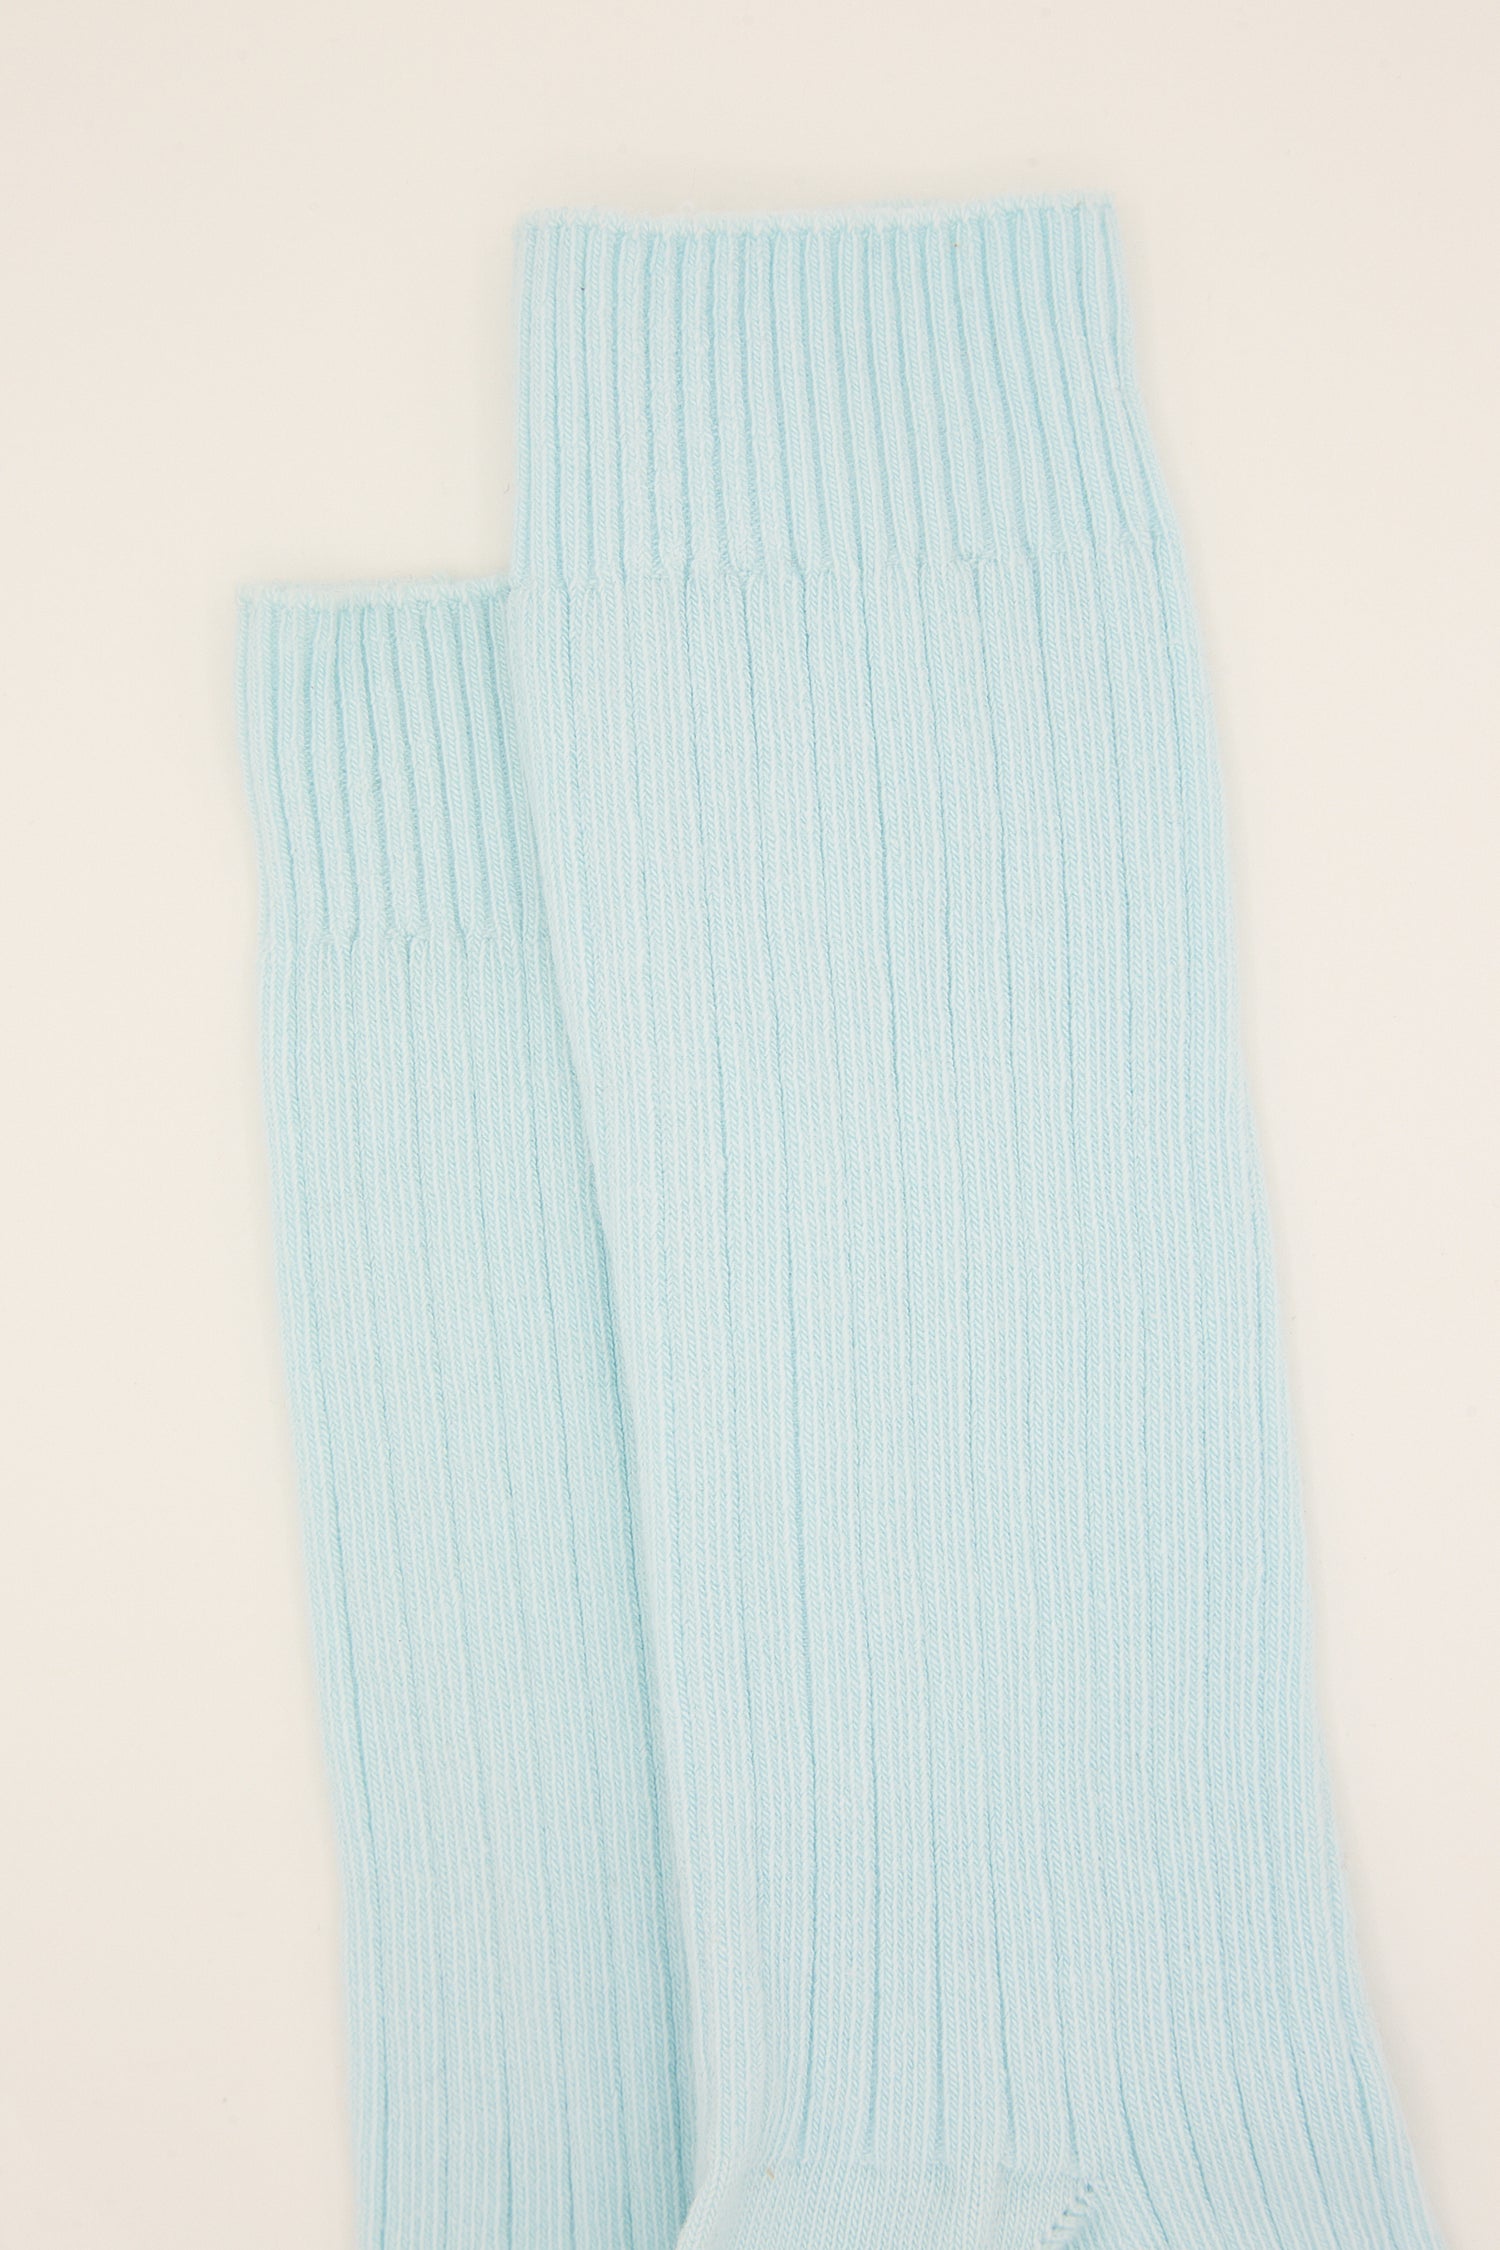 A pair of Cotton Rib Overankle Socks in Lagoon Blue by Baserange against a white background.